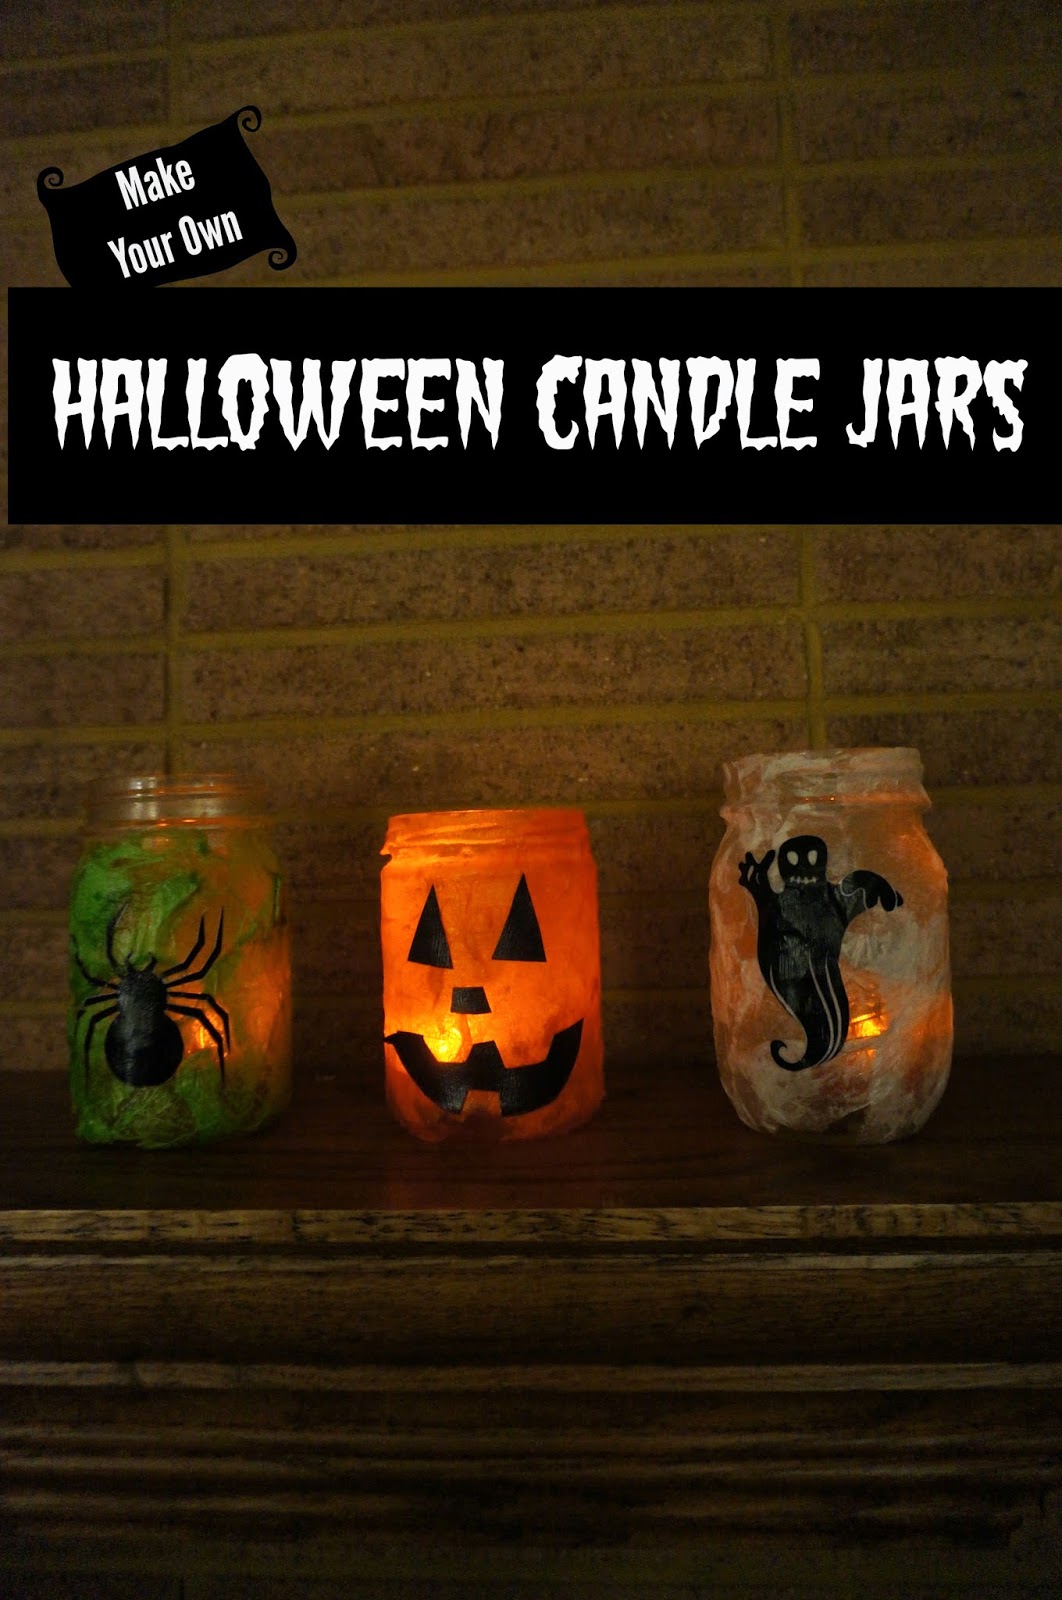 For a simple Halloween decoration, try making these candle jars with your kids. They're easy and spooky and the possibilities are endless.